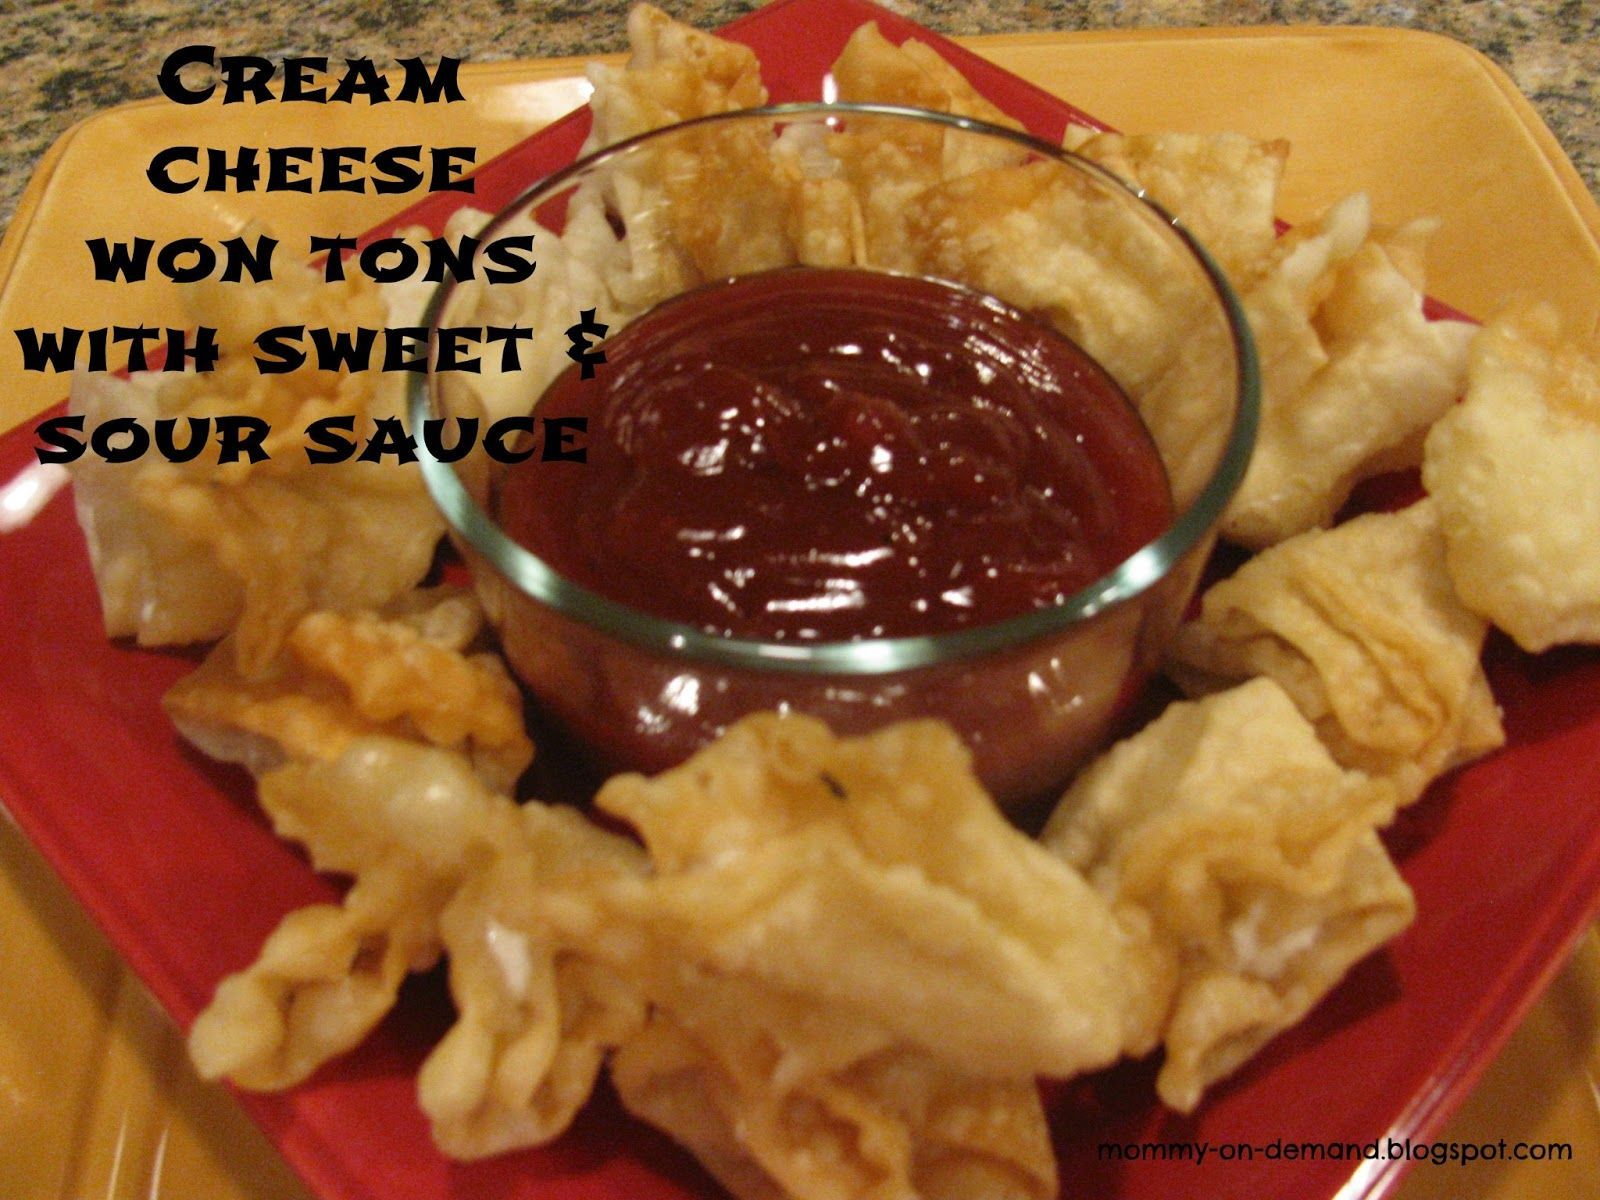 Cream Cheese Won tons recipe from MOMMY ON DEMAND